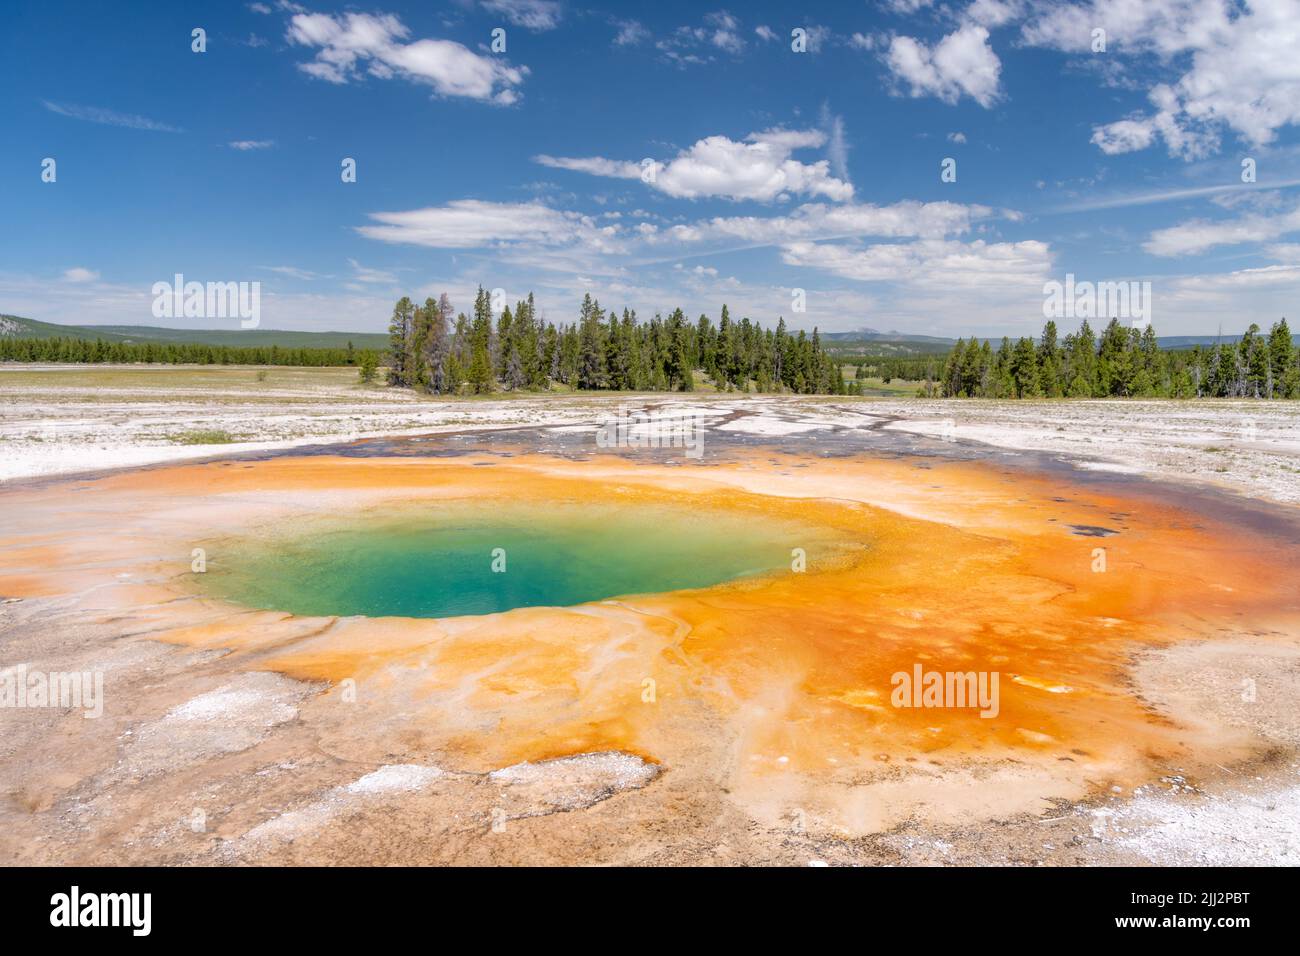 Opal Pool is one of several geological features found in the Midway Geyser Basin in Yellowstone National Park. Stock Photo